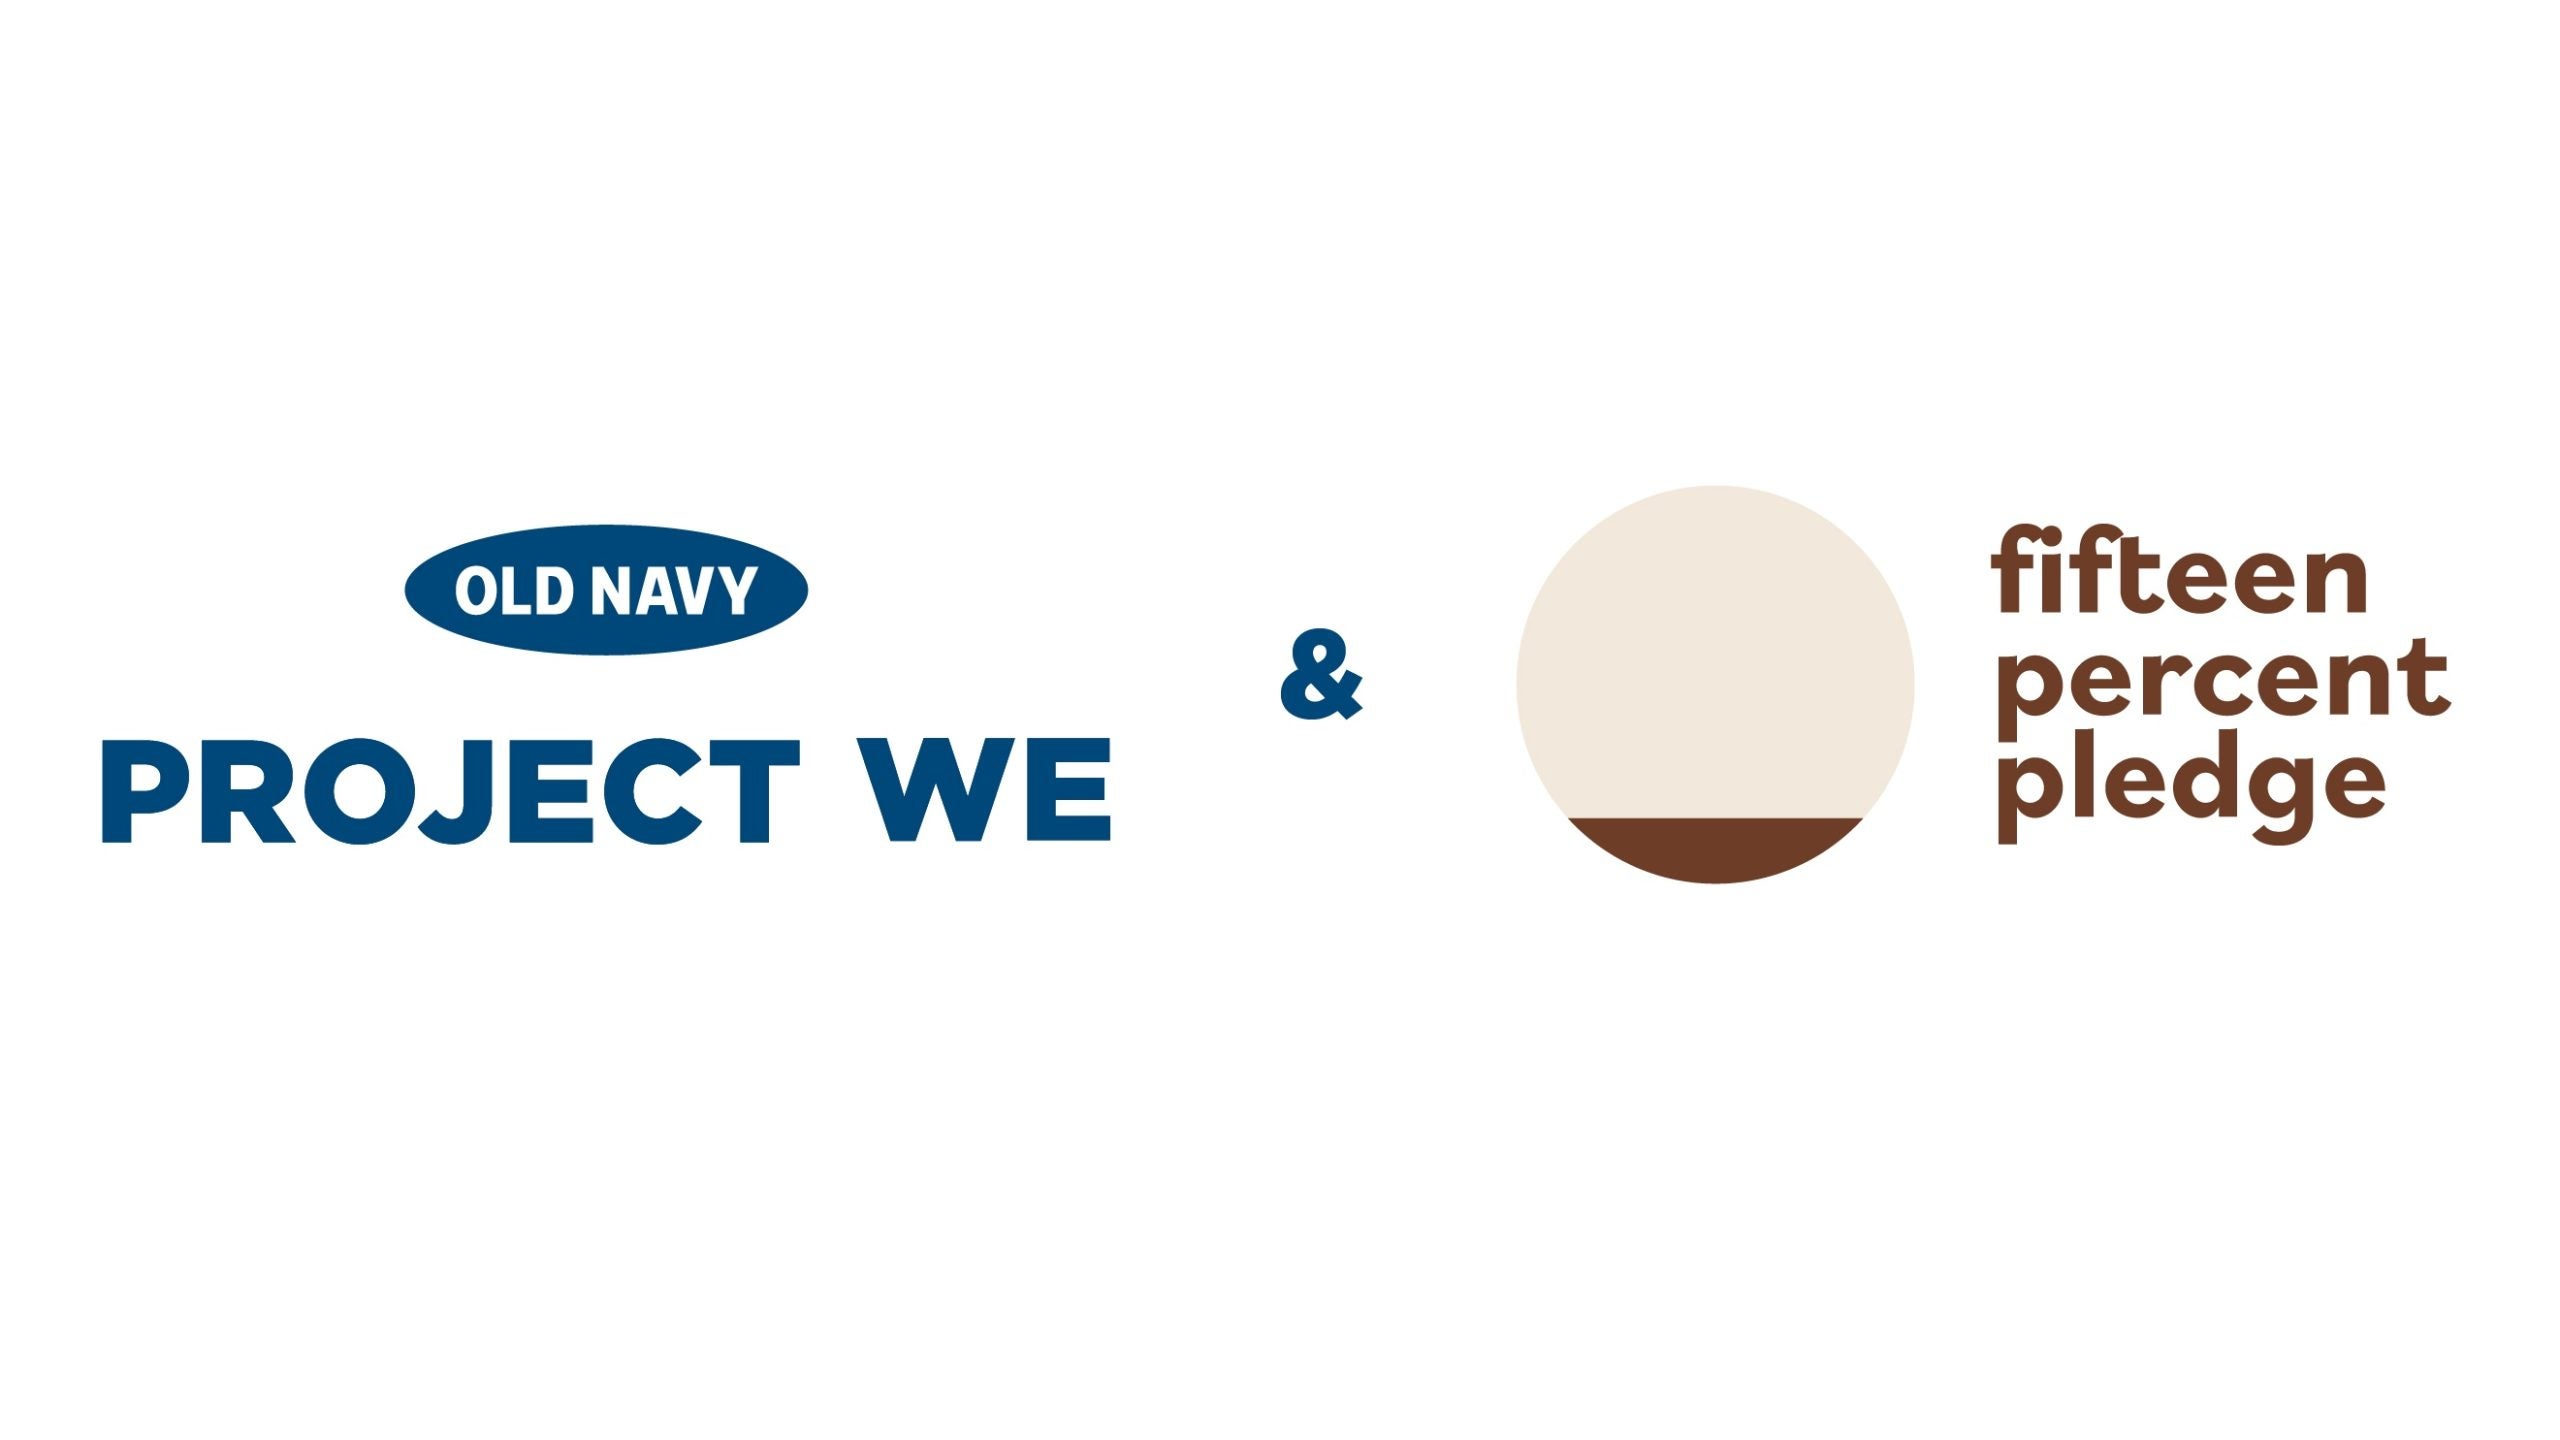 Old Navy And The Fifteen Percent Pledge Unite To Support Black Entrepreneurs